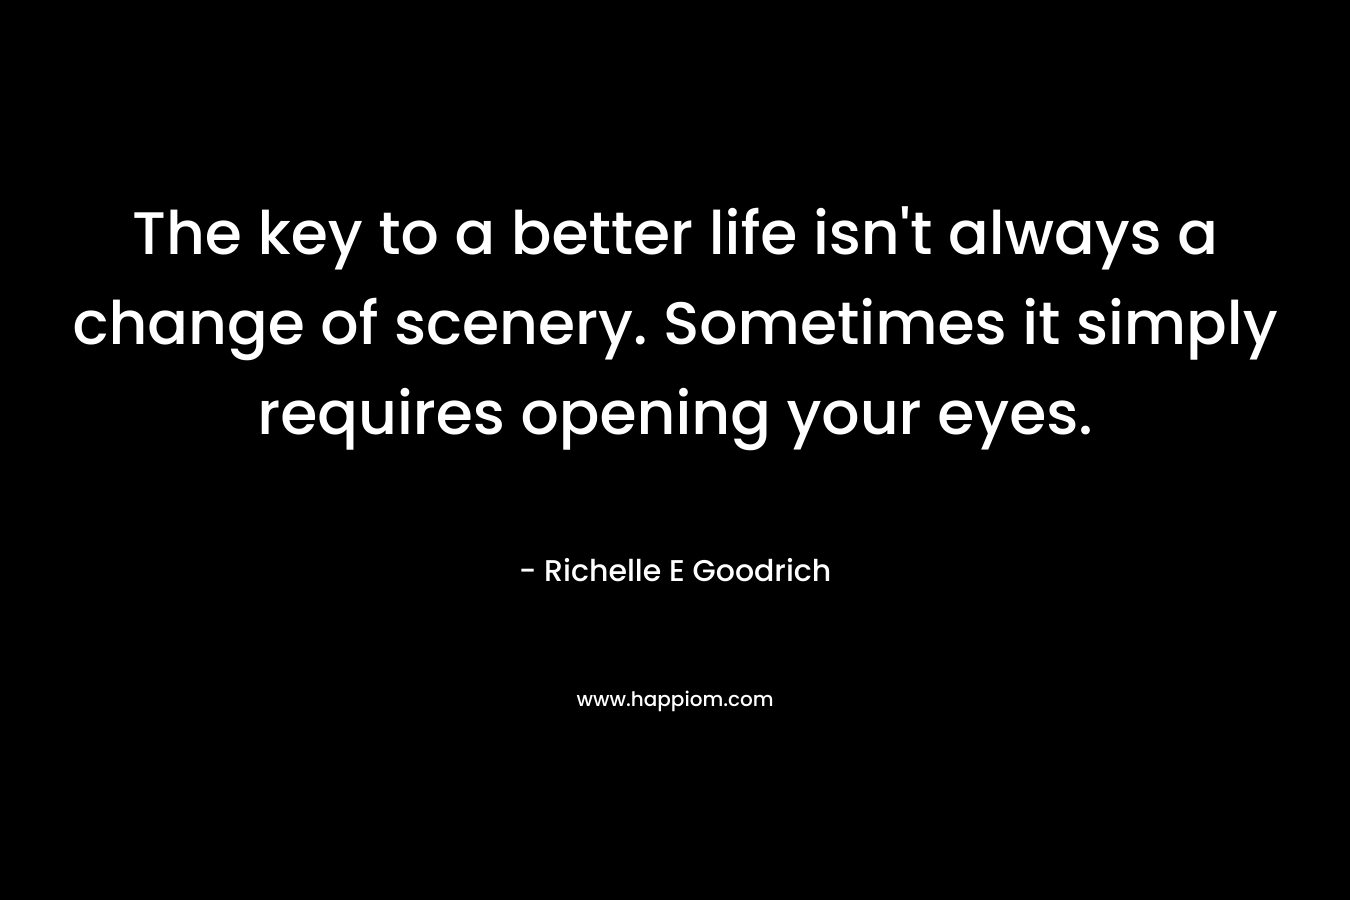 The key to a better life isn’t always a change of scenery. Sometimes it simply requires opening your eyes. – Richelle E Goodrich